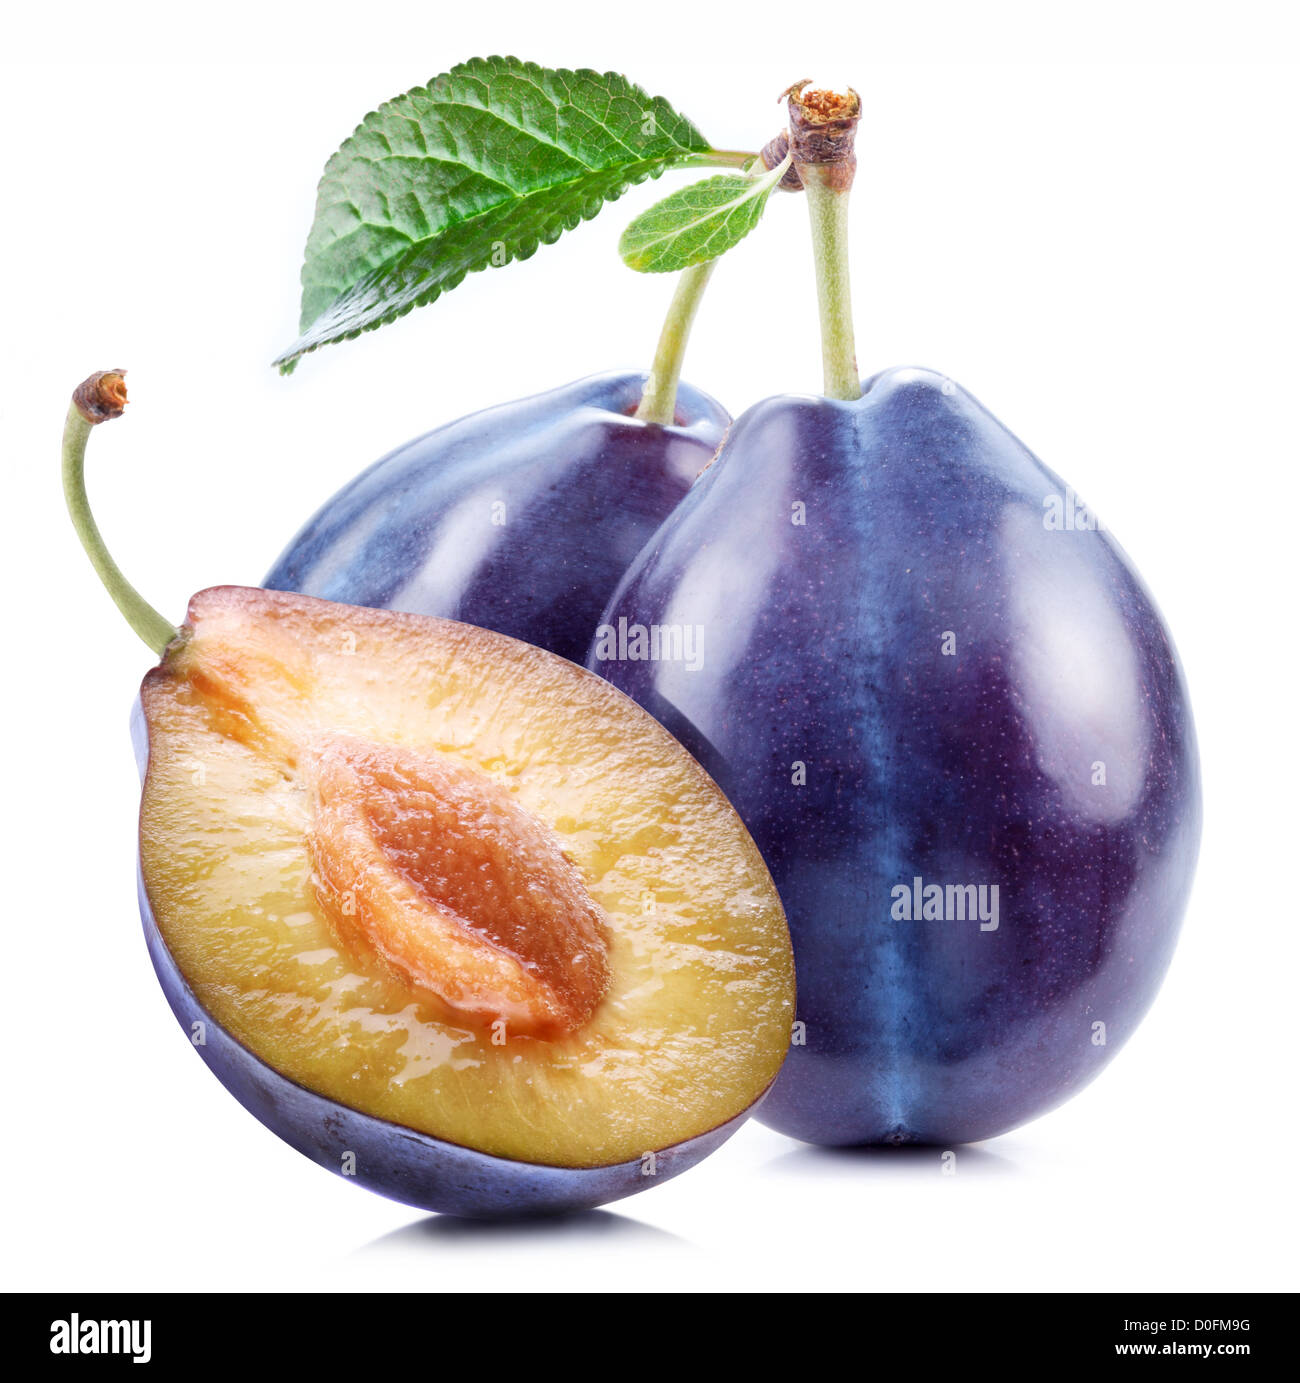 Plums with a slice and leaf on a white background. Stock Photo